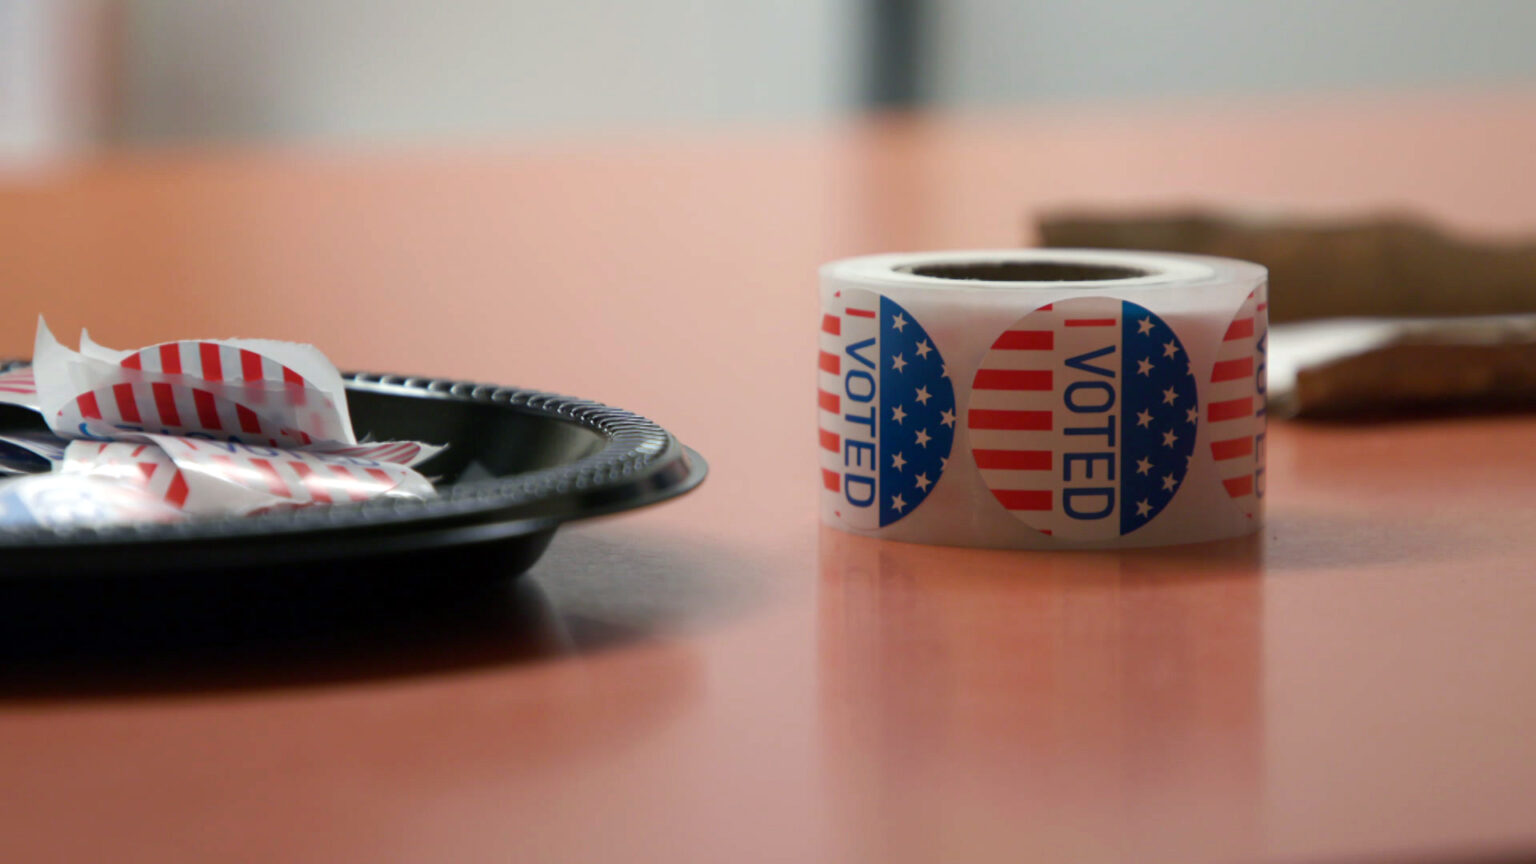 A roll of stickers with a stars-and-stripes graphic and the words I Voted sits on a table next to a disposable plastic plate filled with individual stickers.